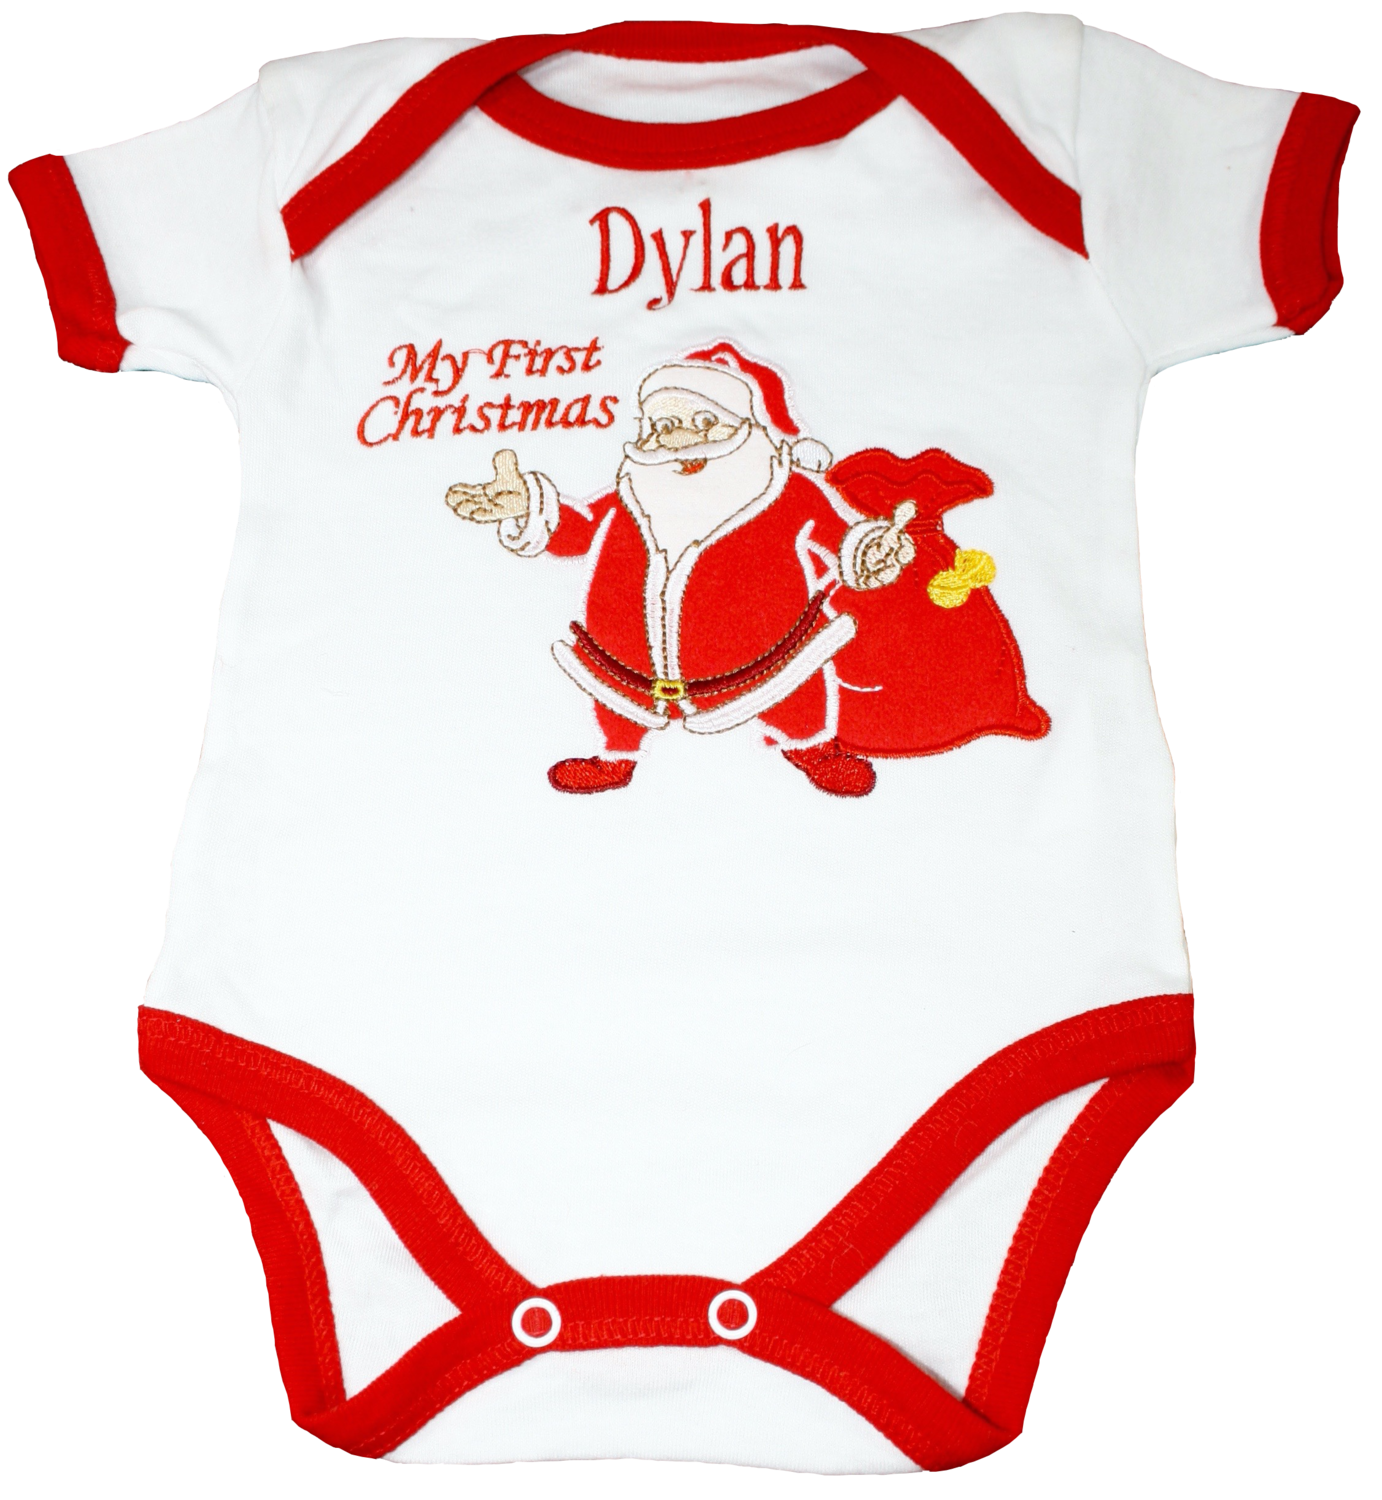 My first Christmas vest with Santa and sack